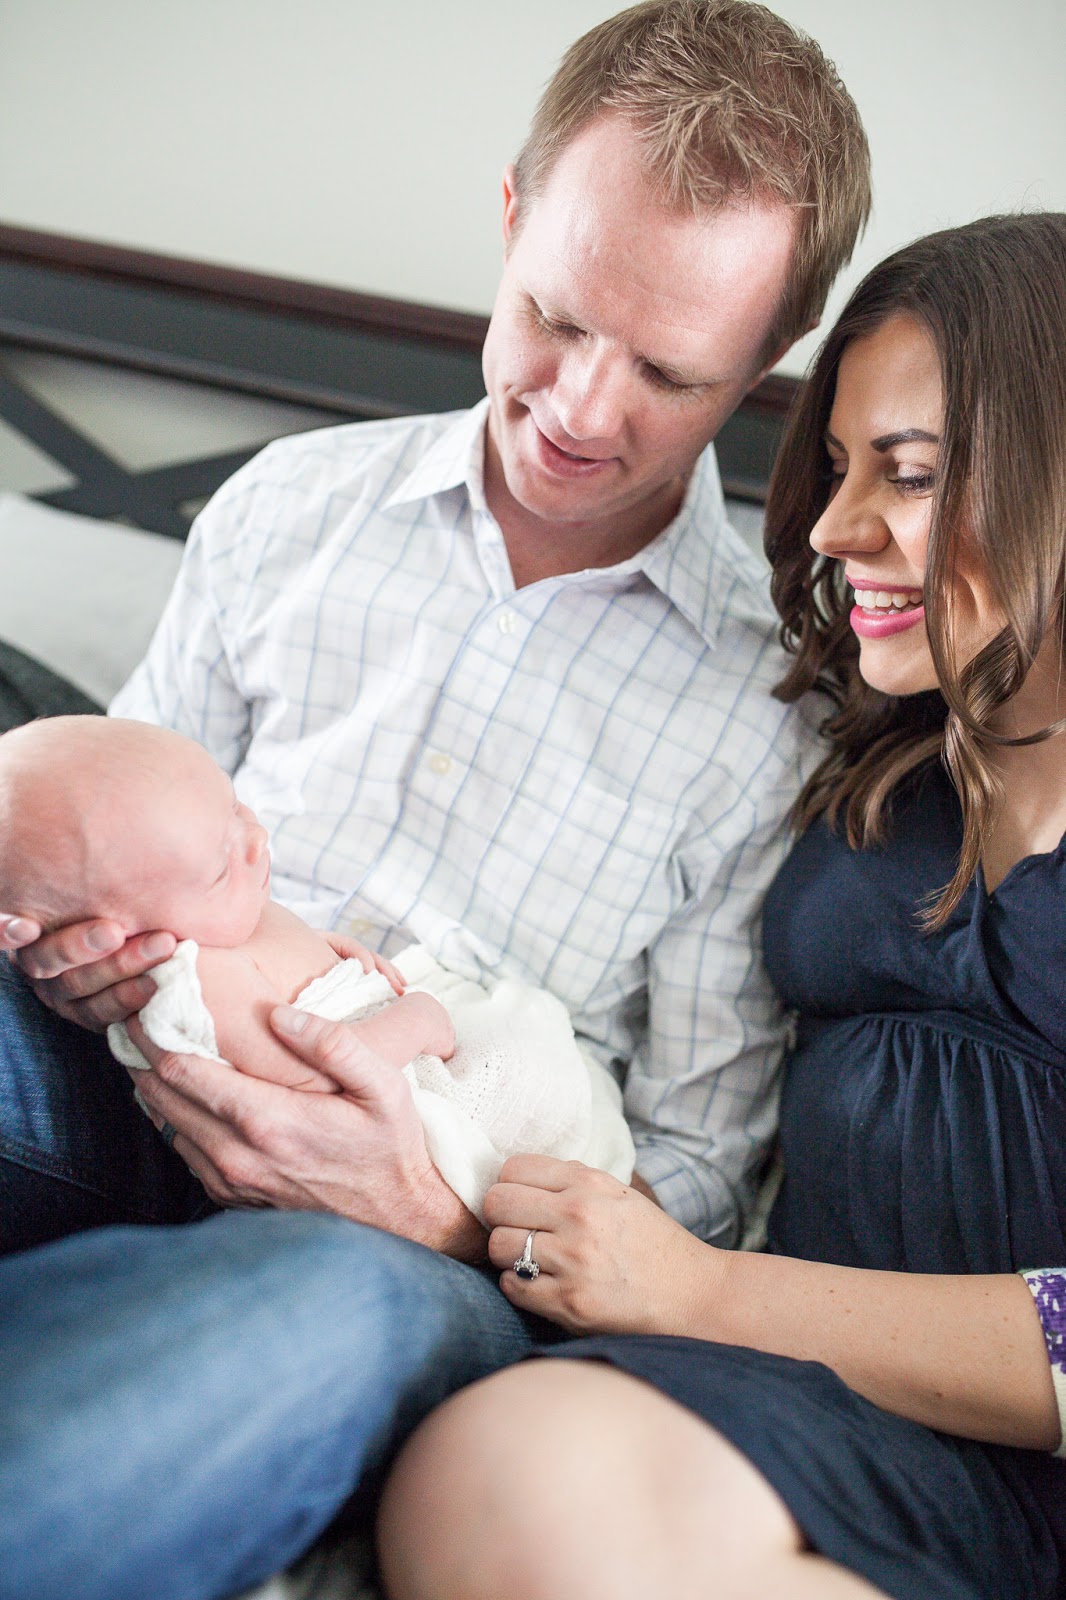 New parents smiling at newborn baby during a newborn photo shoot at home. 